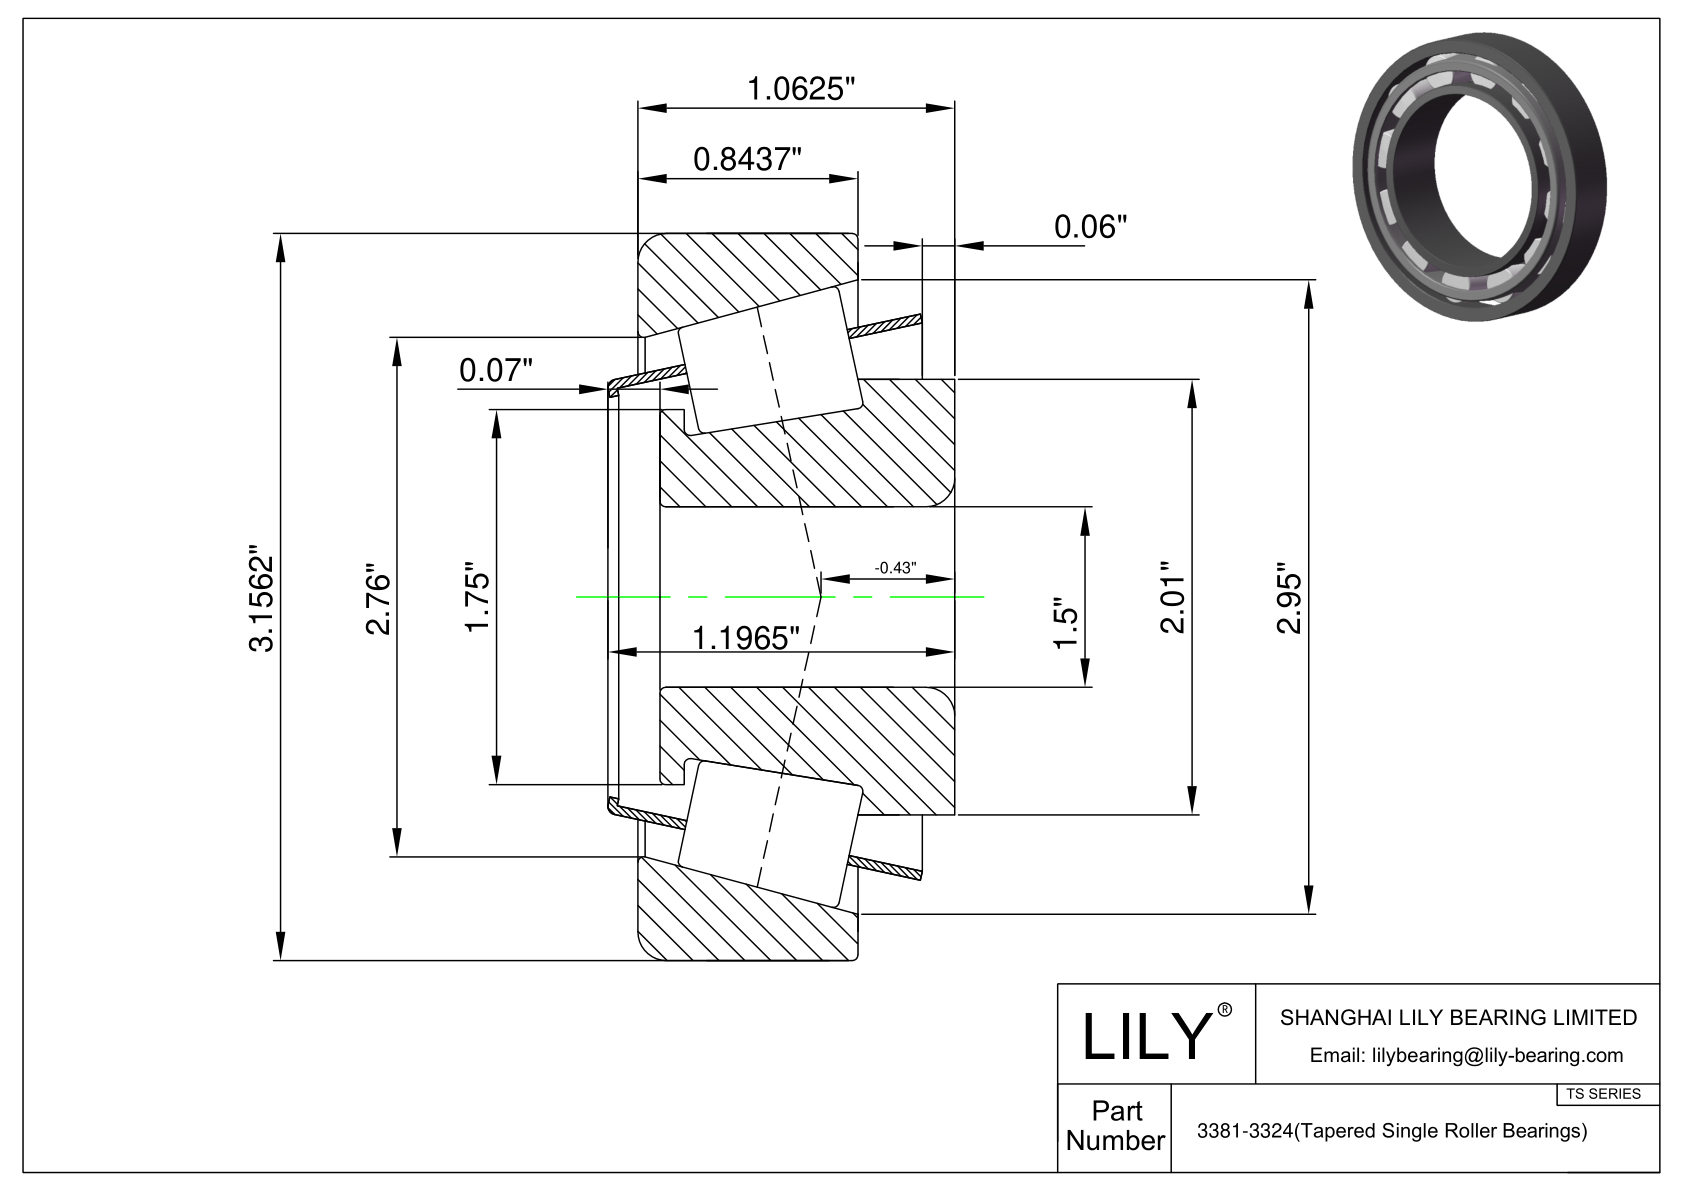 3381-3324 TS (Tapered Single Roller Bearings) (Imperial) cad drawing